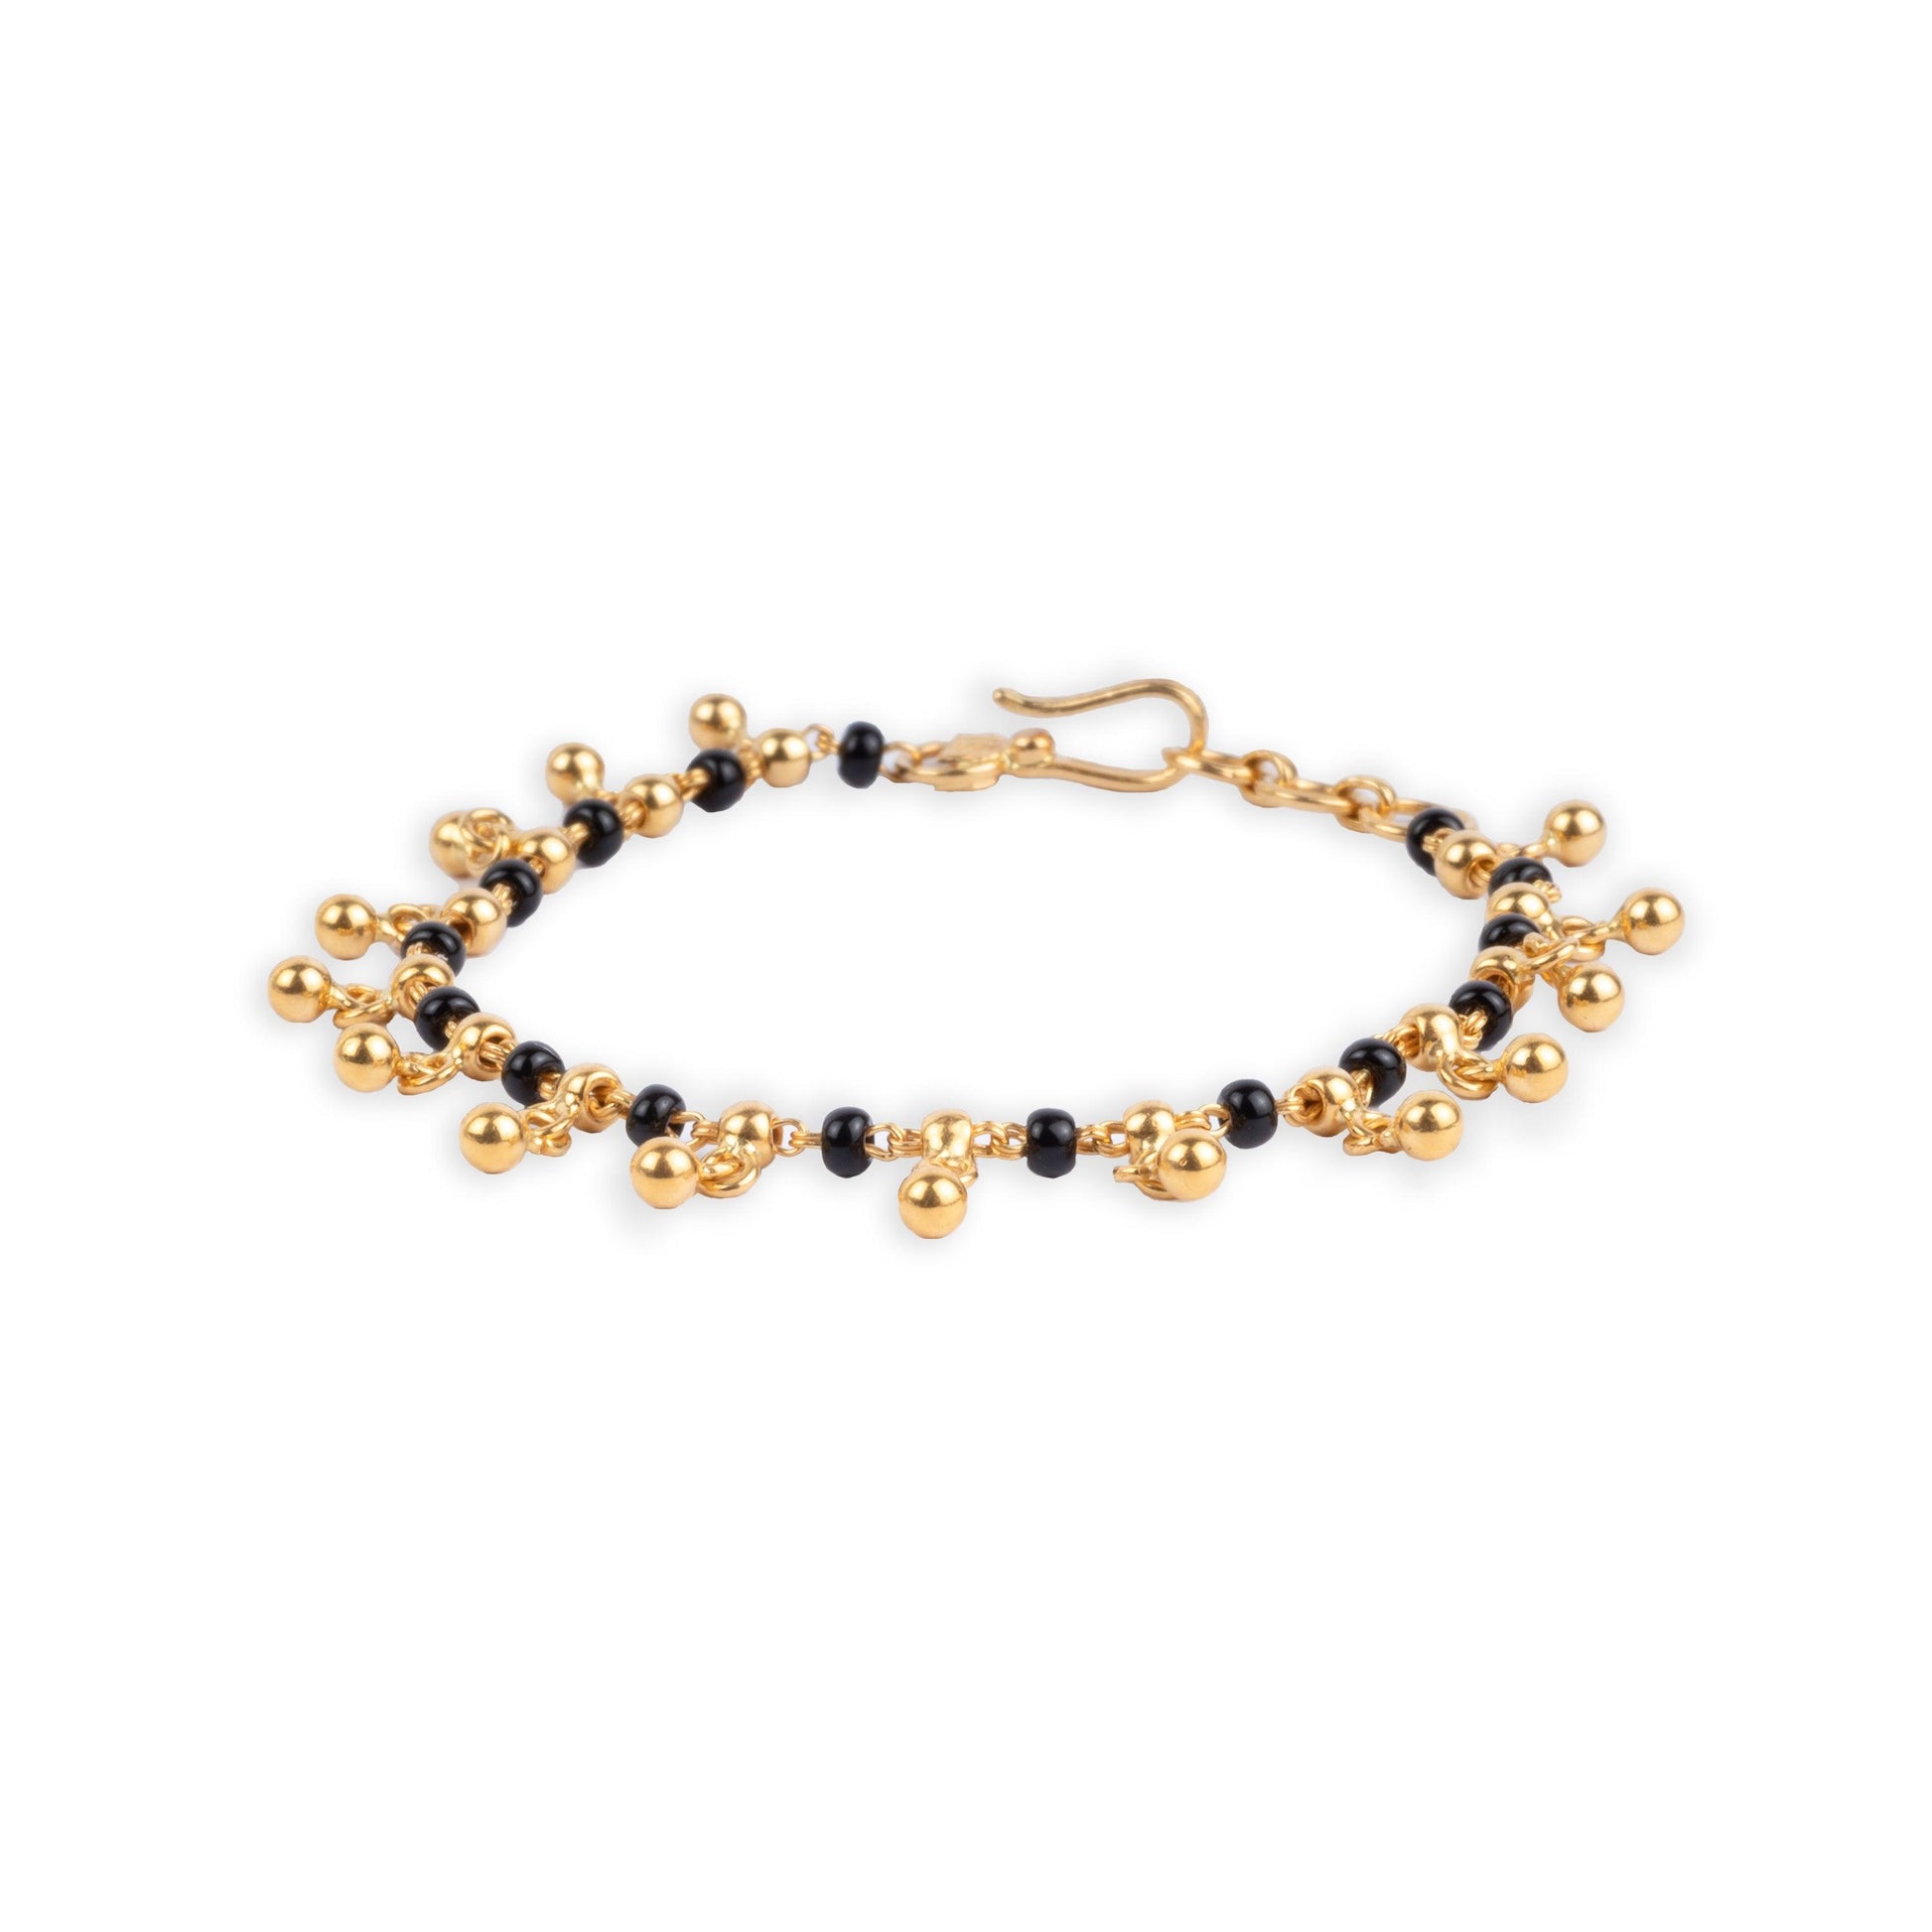 22ct Gold Black Bead and Gold Drops Children's Bracelets with Hook Clasp CBR-8269 - Minar Jewellers